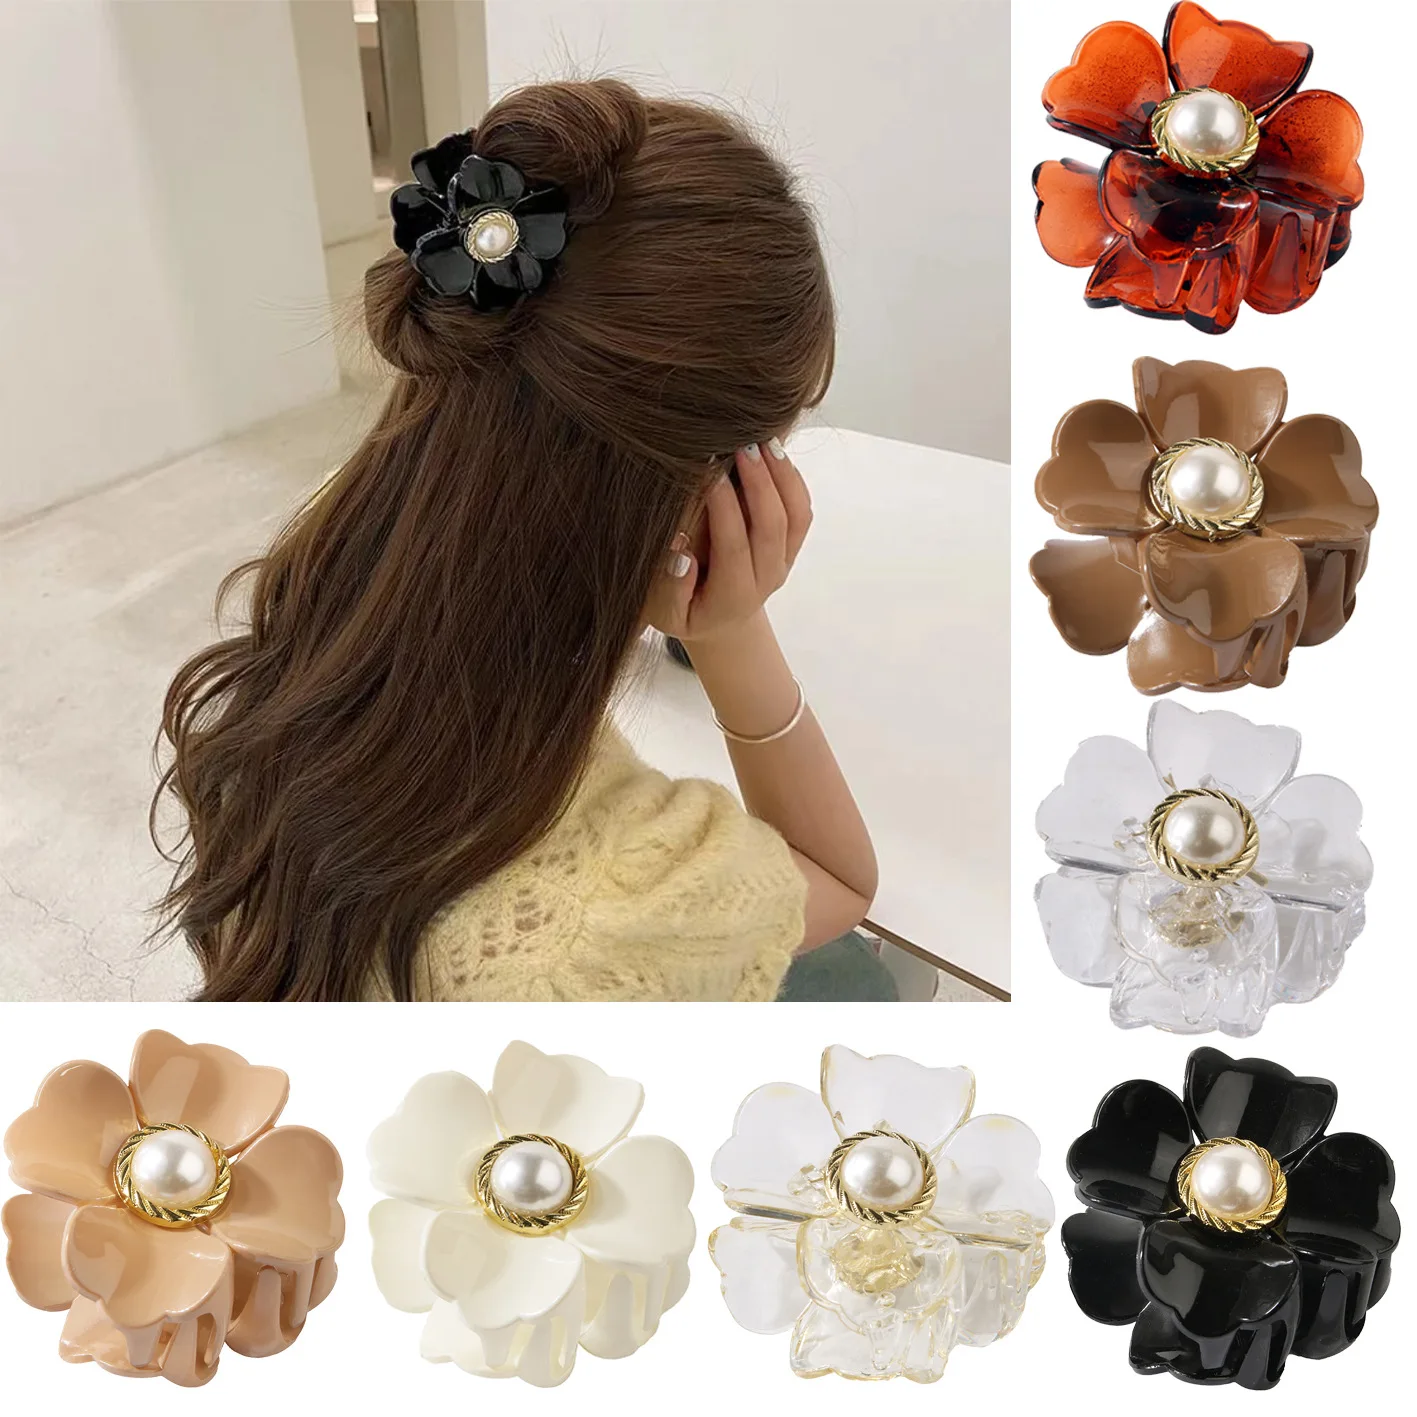 

AISHG Flower Shape Claw Clips Women Elegant Korean Hair Clip Crab Clamps Charm Candy Color Hairpin for Girls Hair Accessories